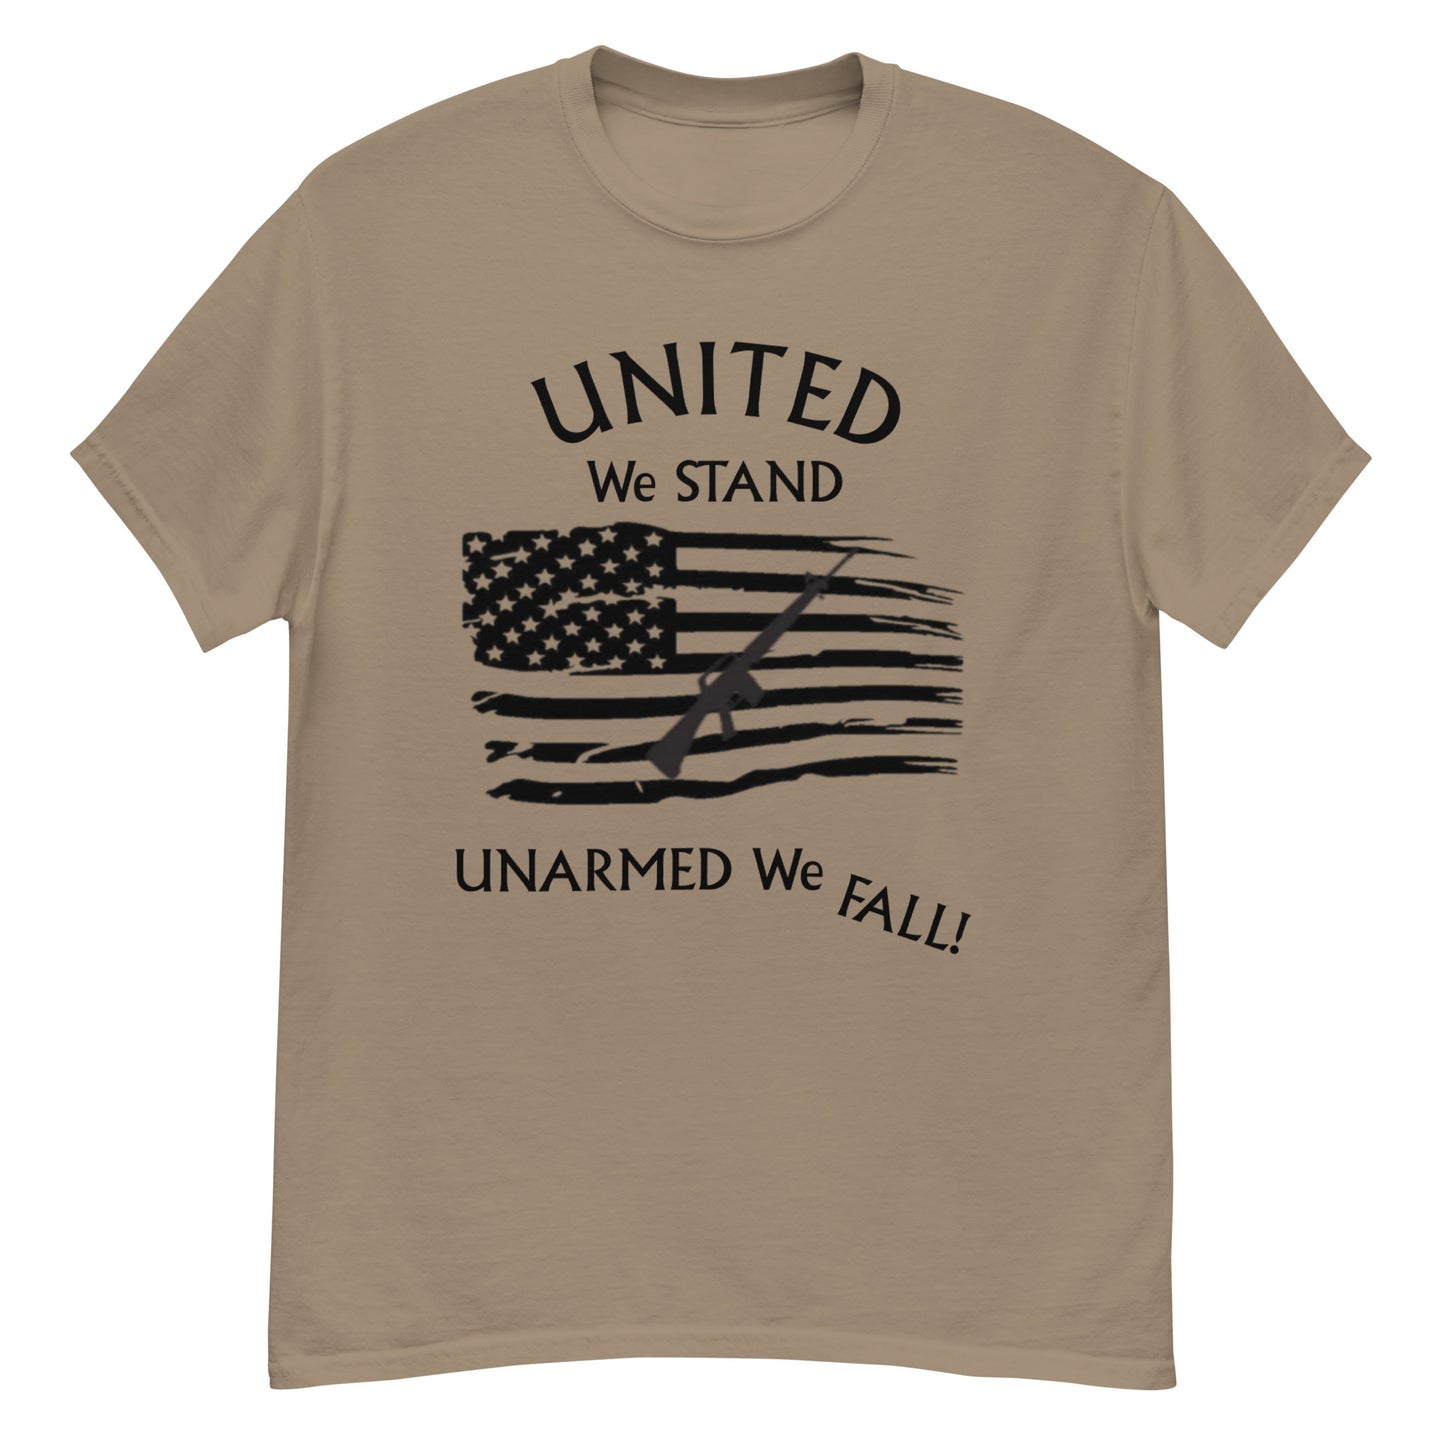 United We Stand, Unarmed we Fall - Unisex t-shirt